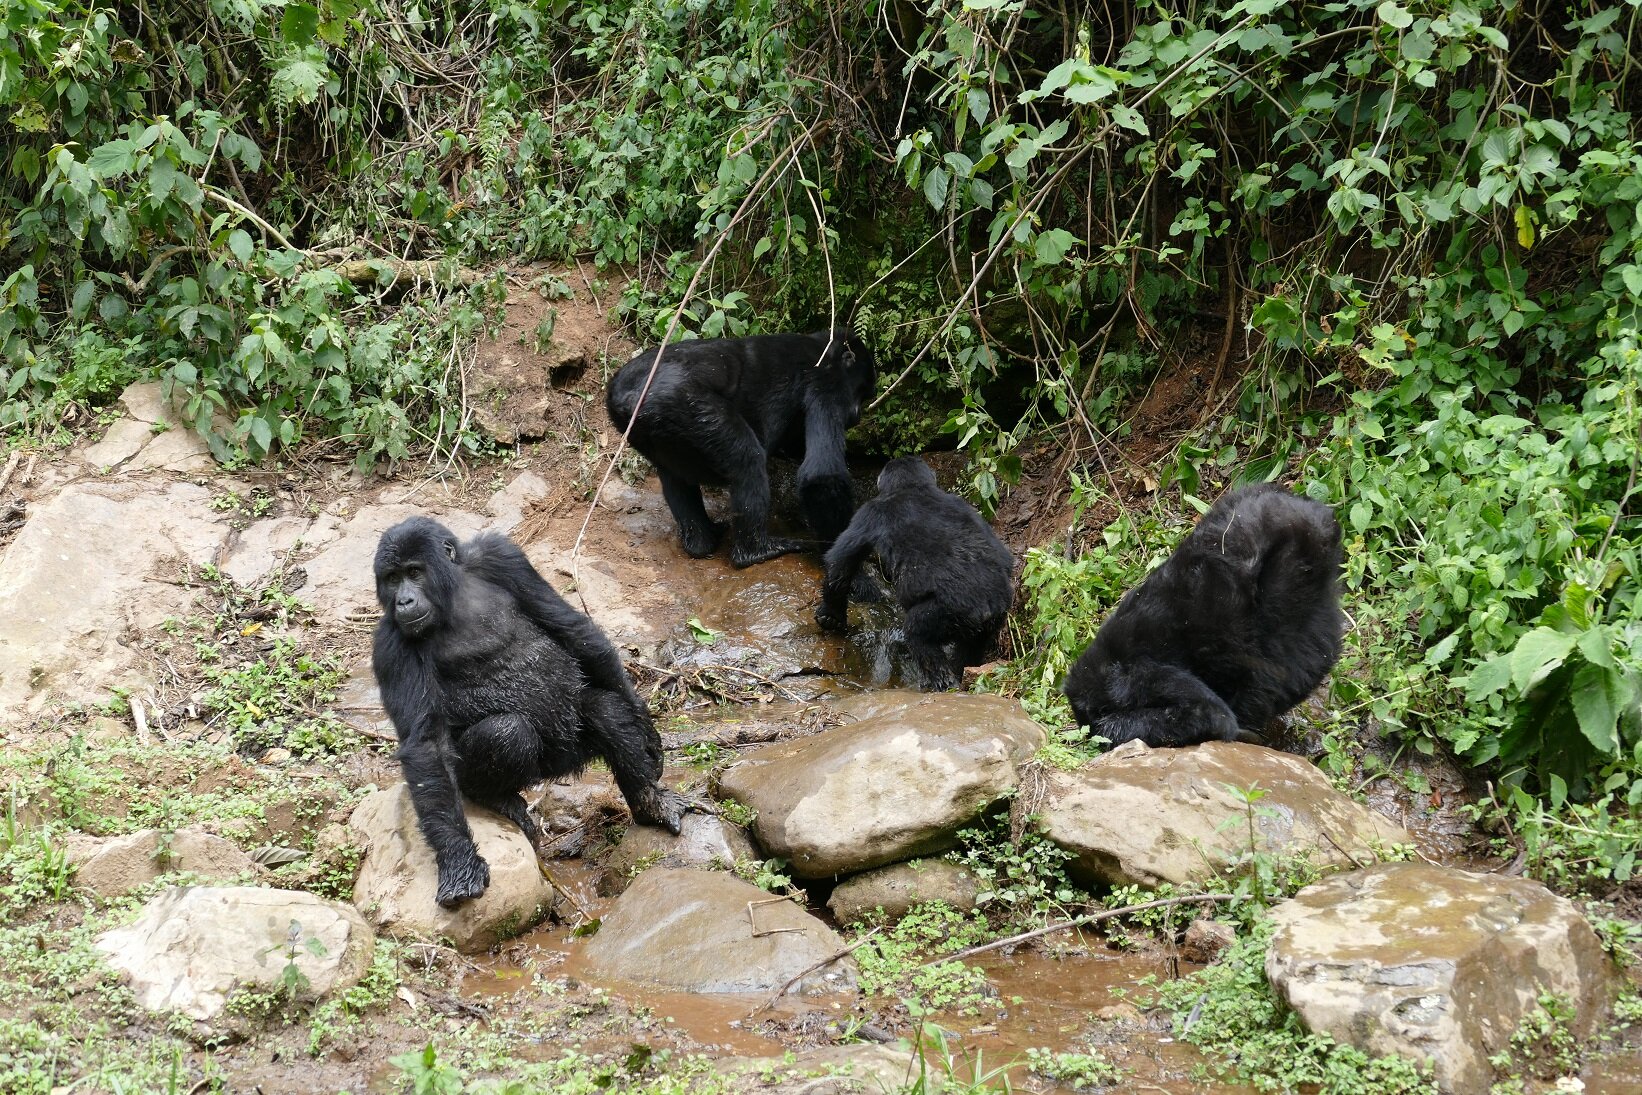 #Climate crisis is making endangered mountain gorillas more thirsty